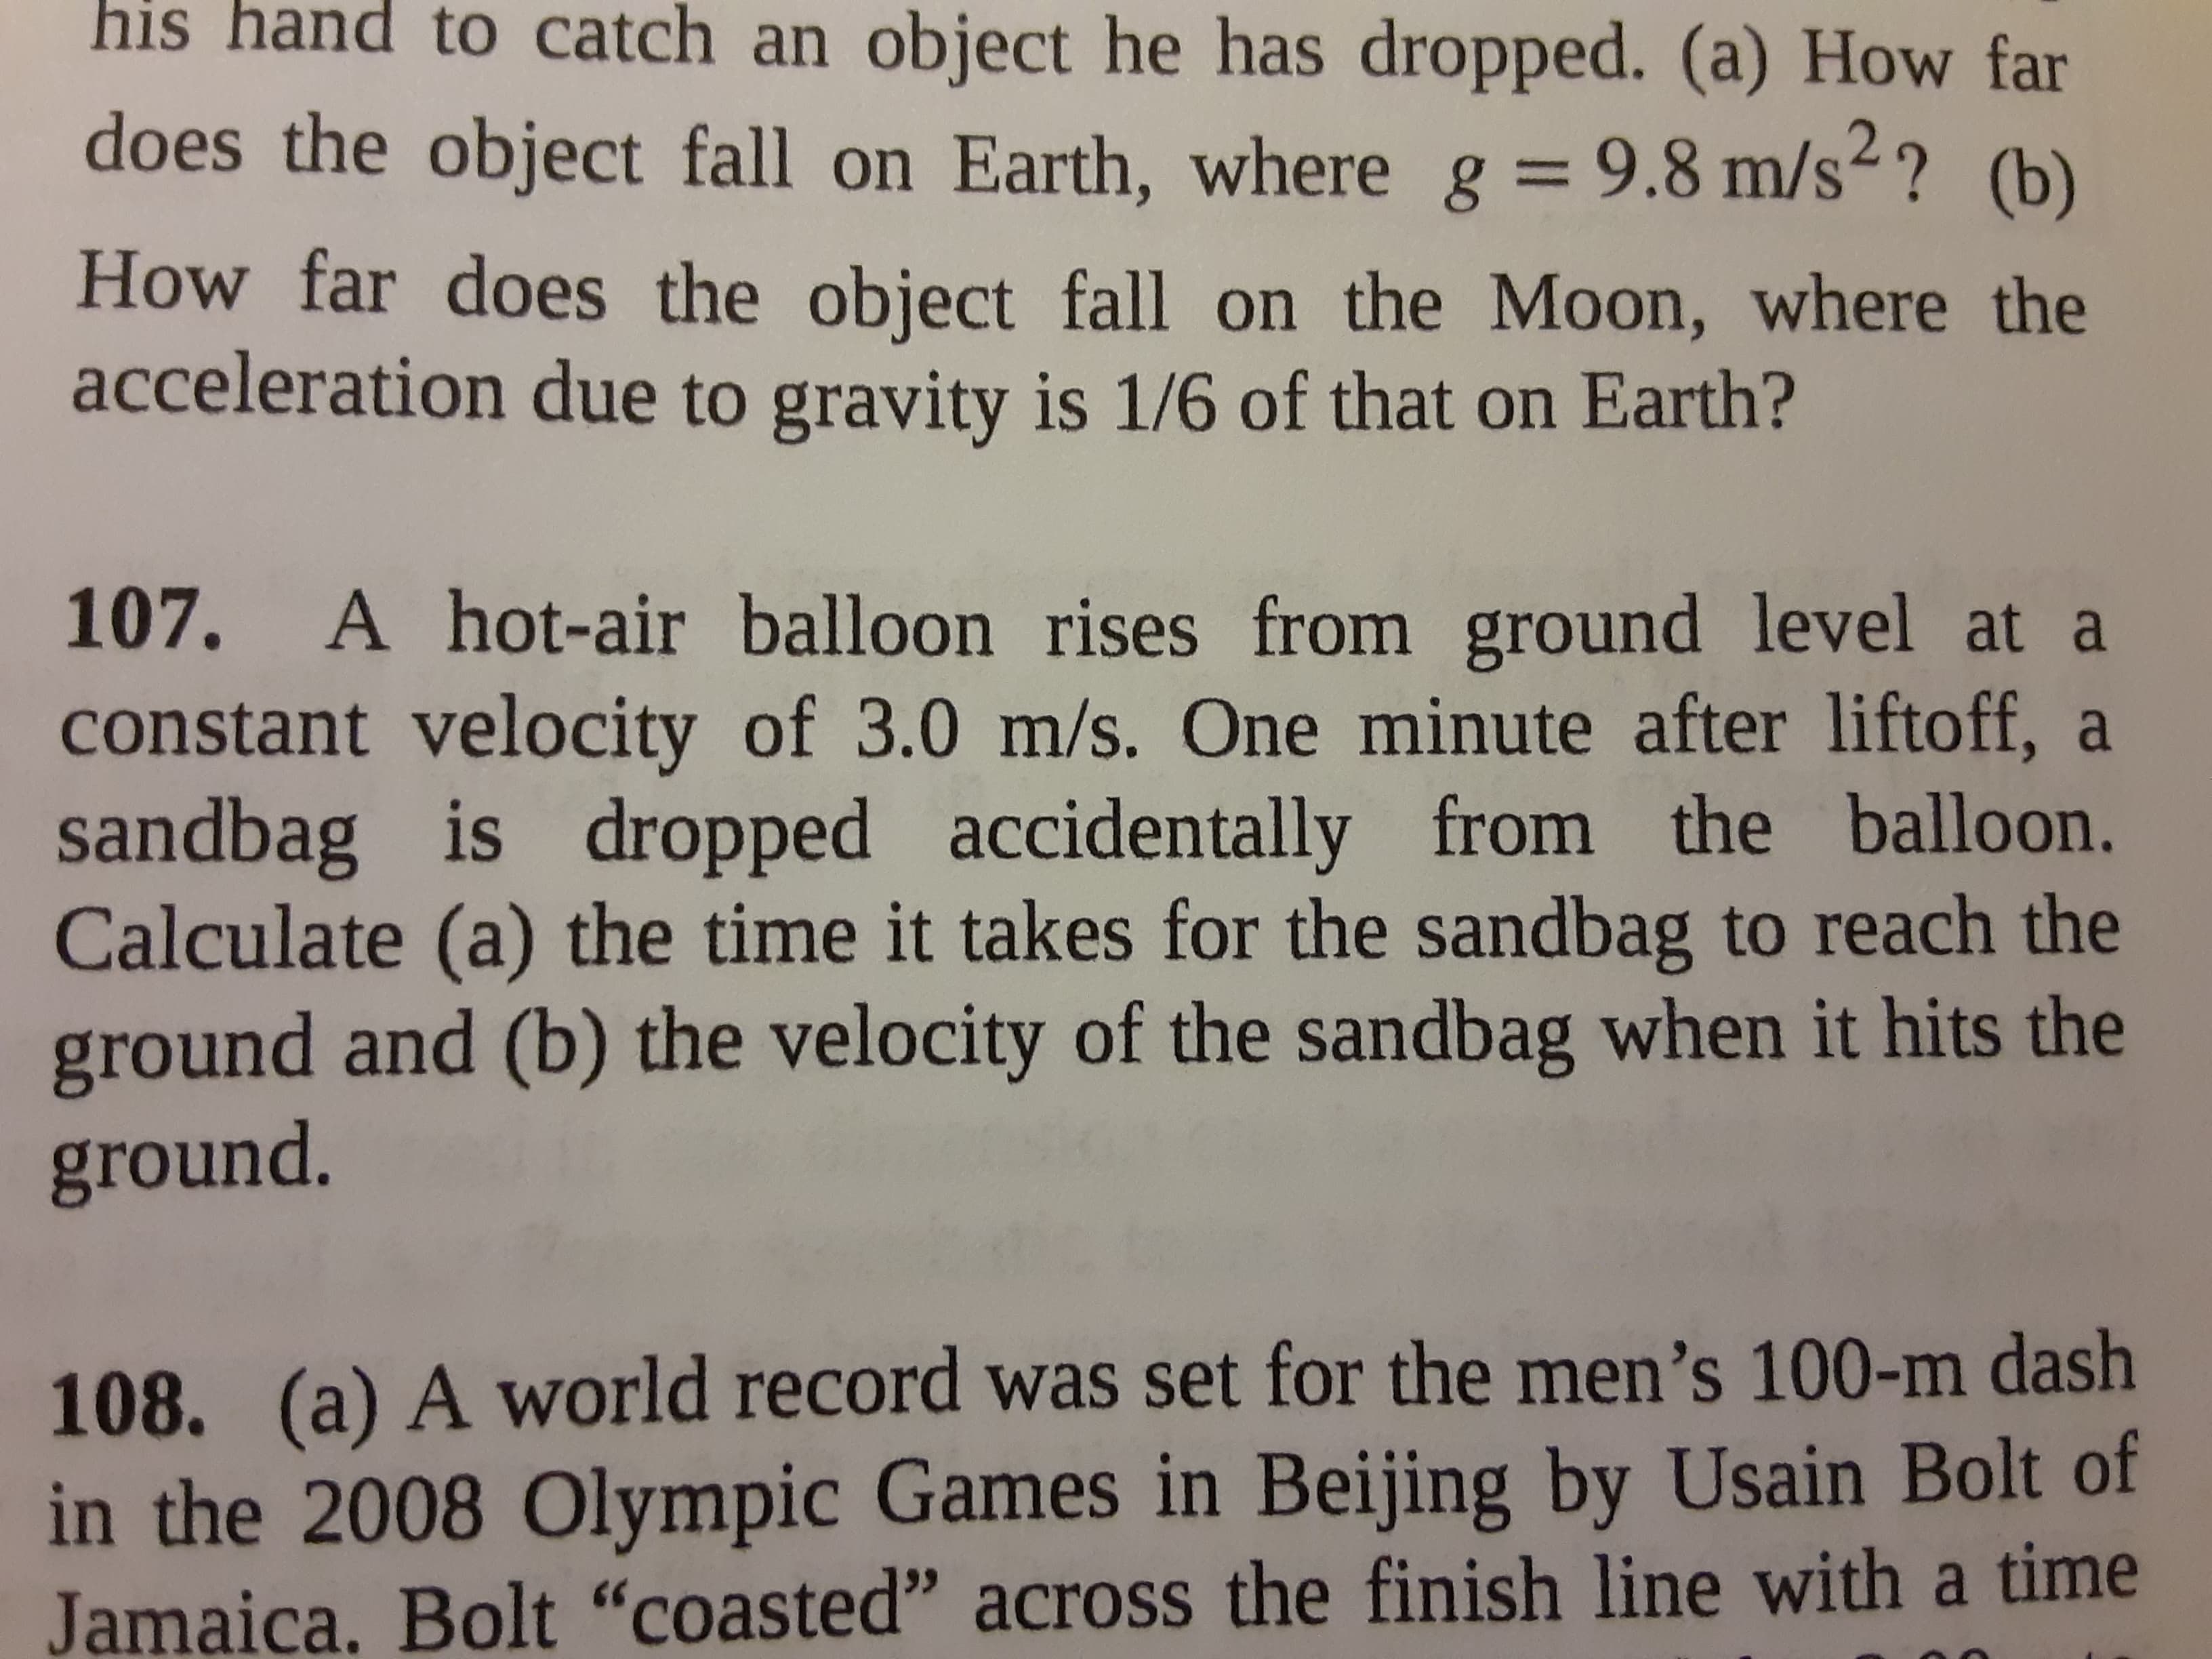 107. A hot-air balloon rises from ground level at a
constant velocity of 3.0 m/s. One minute after liftoff, a
sandbag is dropped accidentally from the balloon.
Calculate (a) the time it takes for the sandbag to reach the
ground and (b) the velocity of the sandbag when it hits the
ground.
